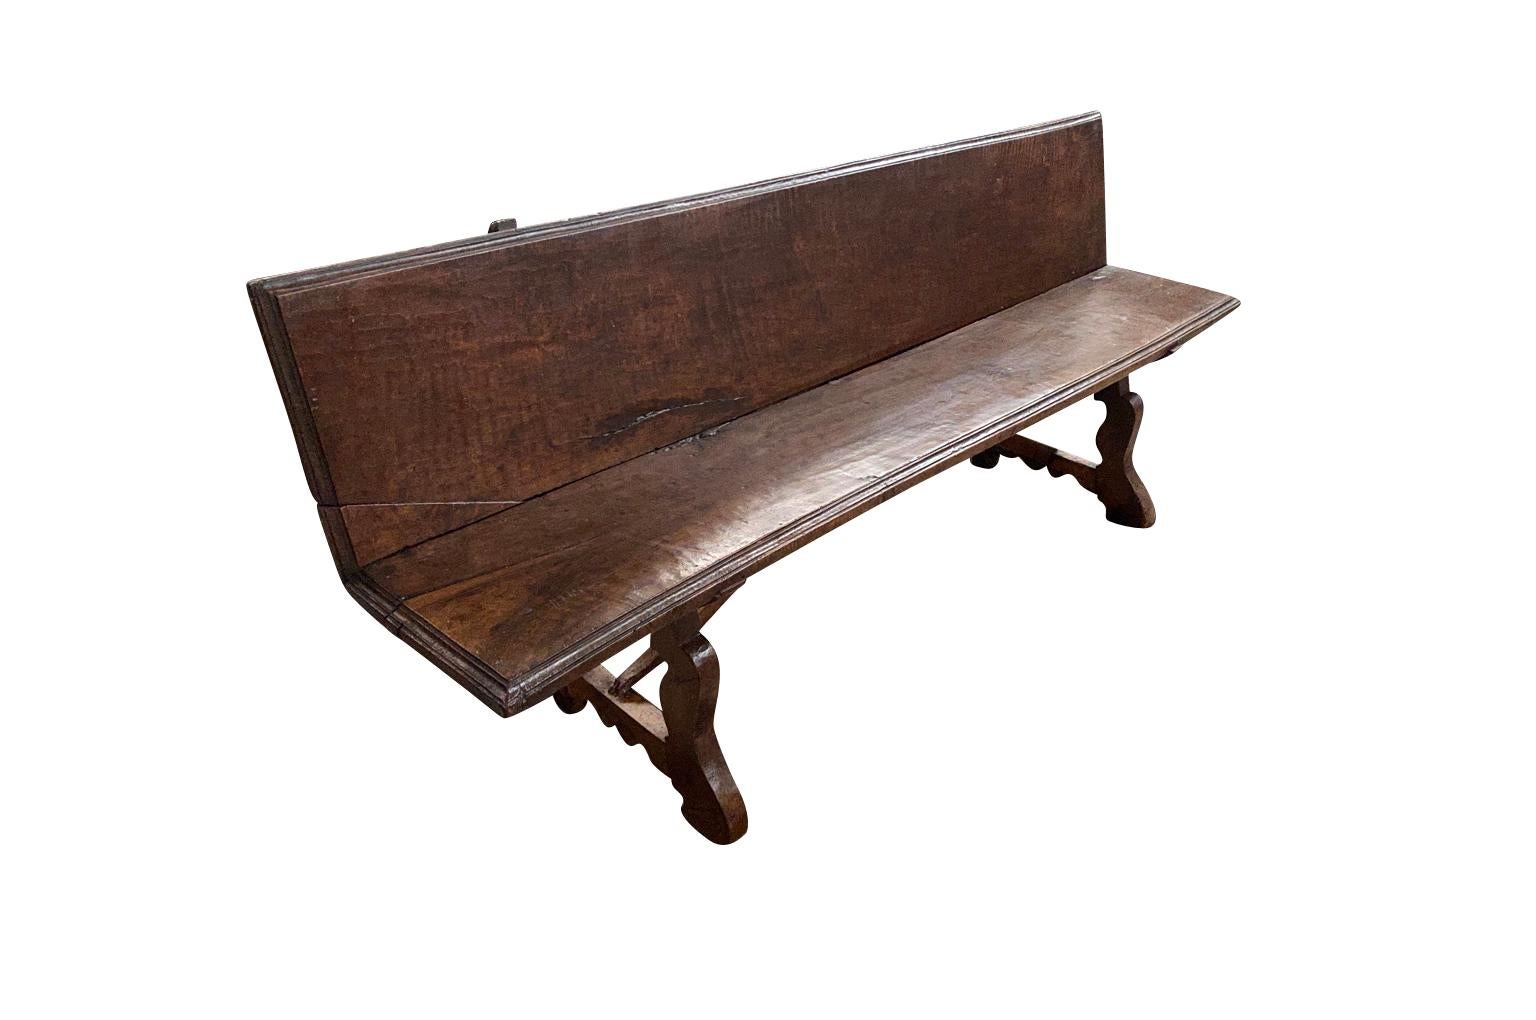 A very handsome 18th century Spanish bench constructed from solid board planks of walnut. Sensational patina. The seat height is 18 5/8